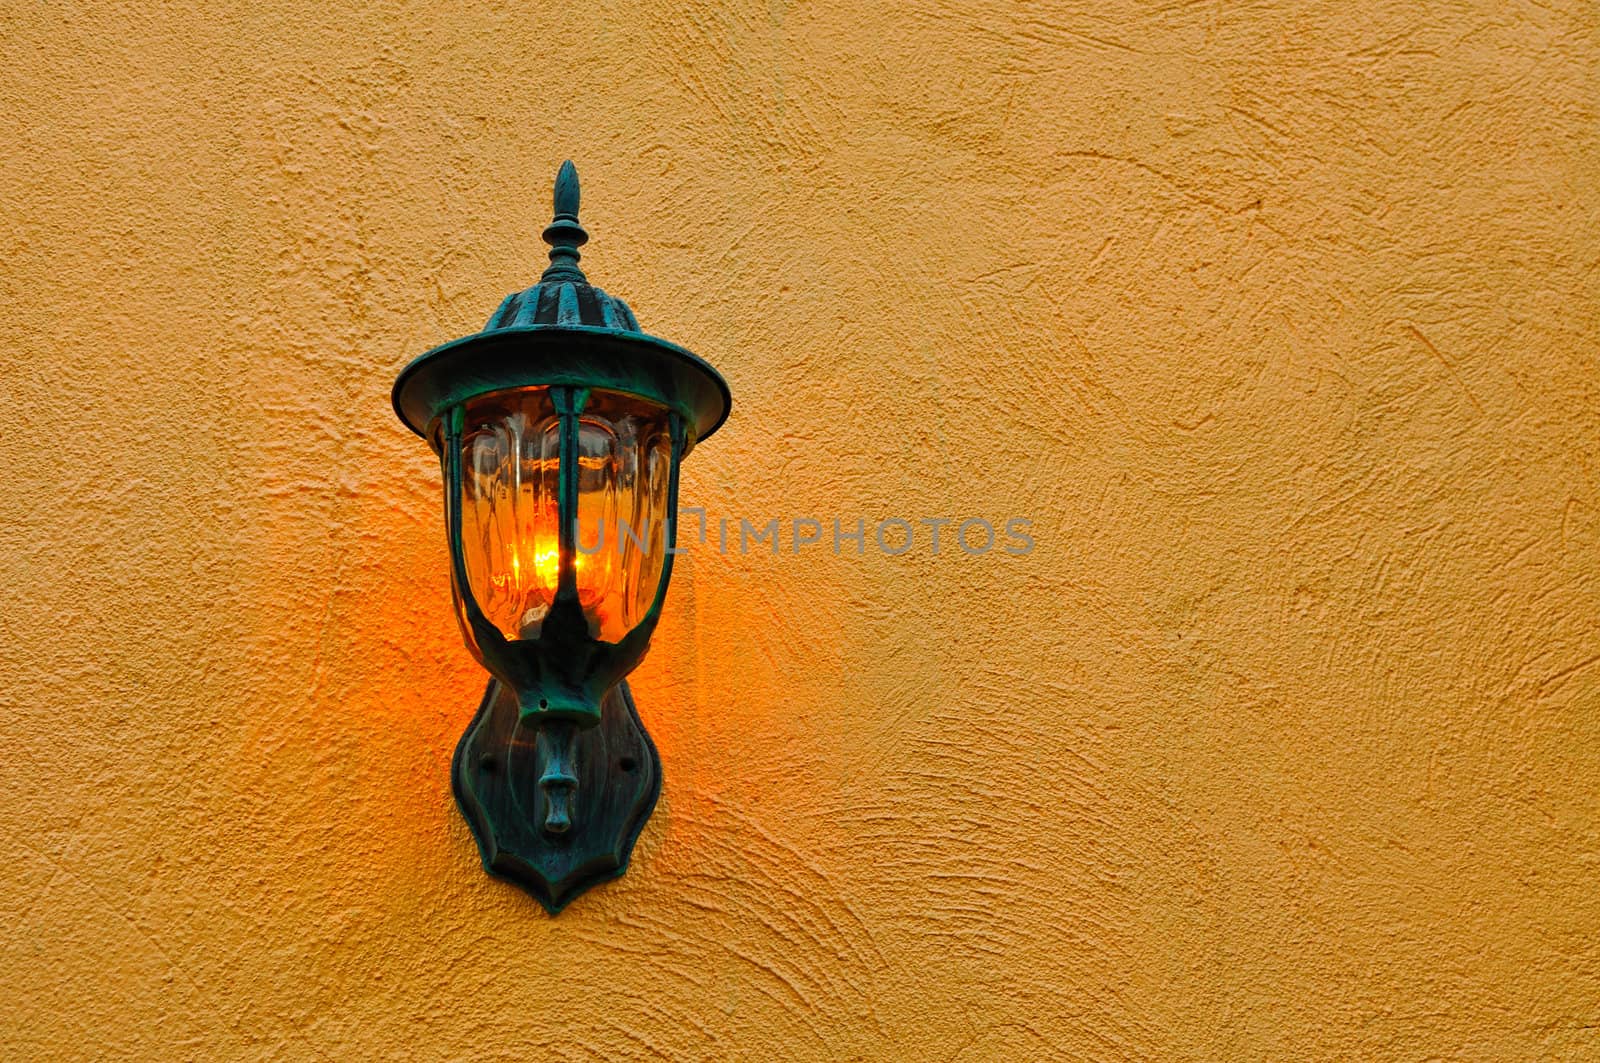 Outdoor wall lamp by alvinb